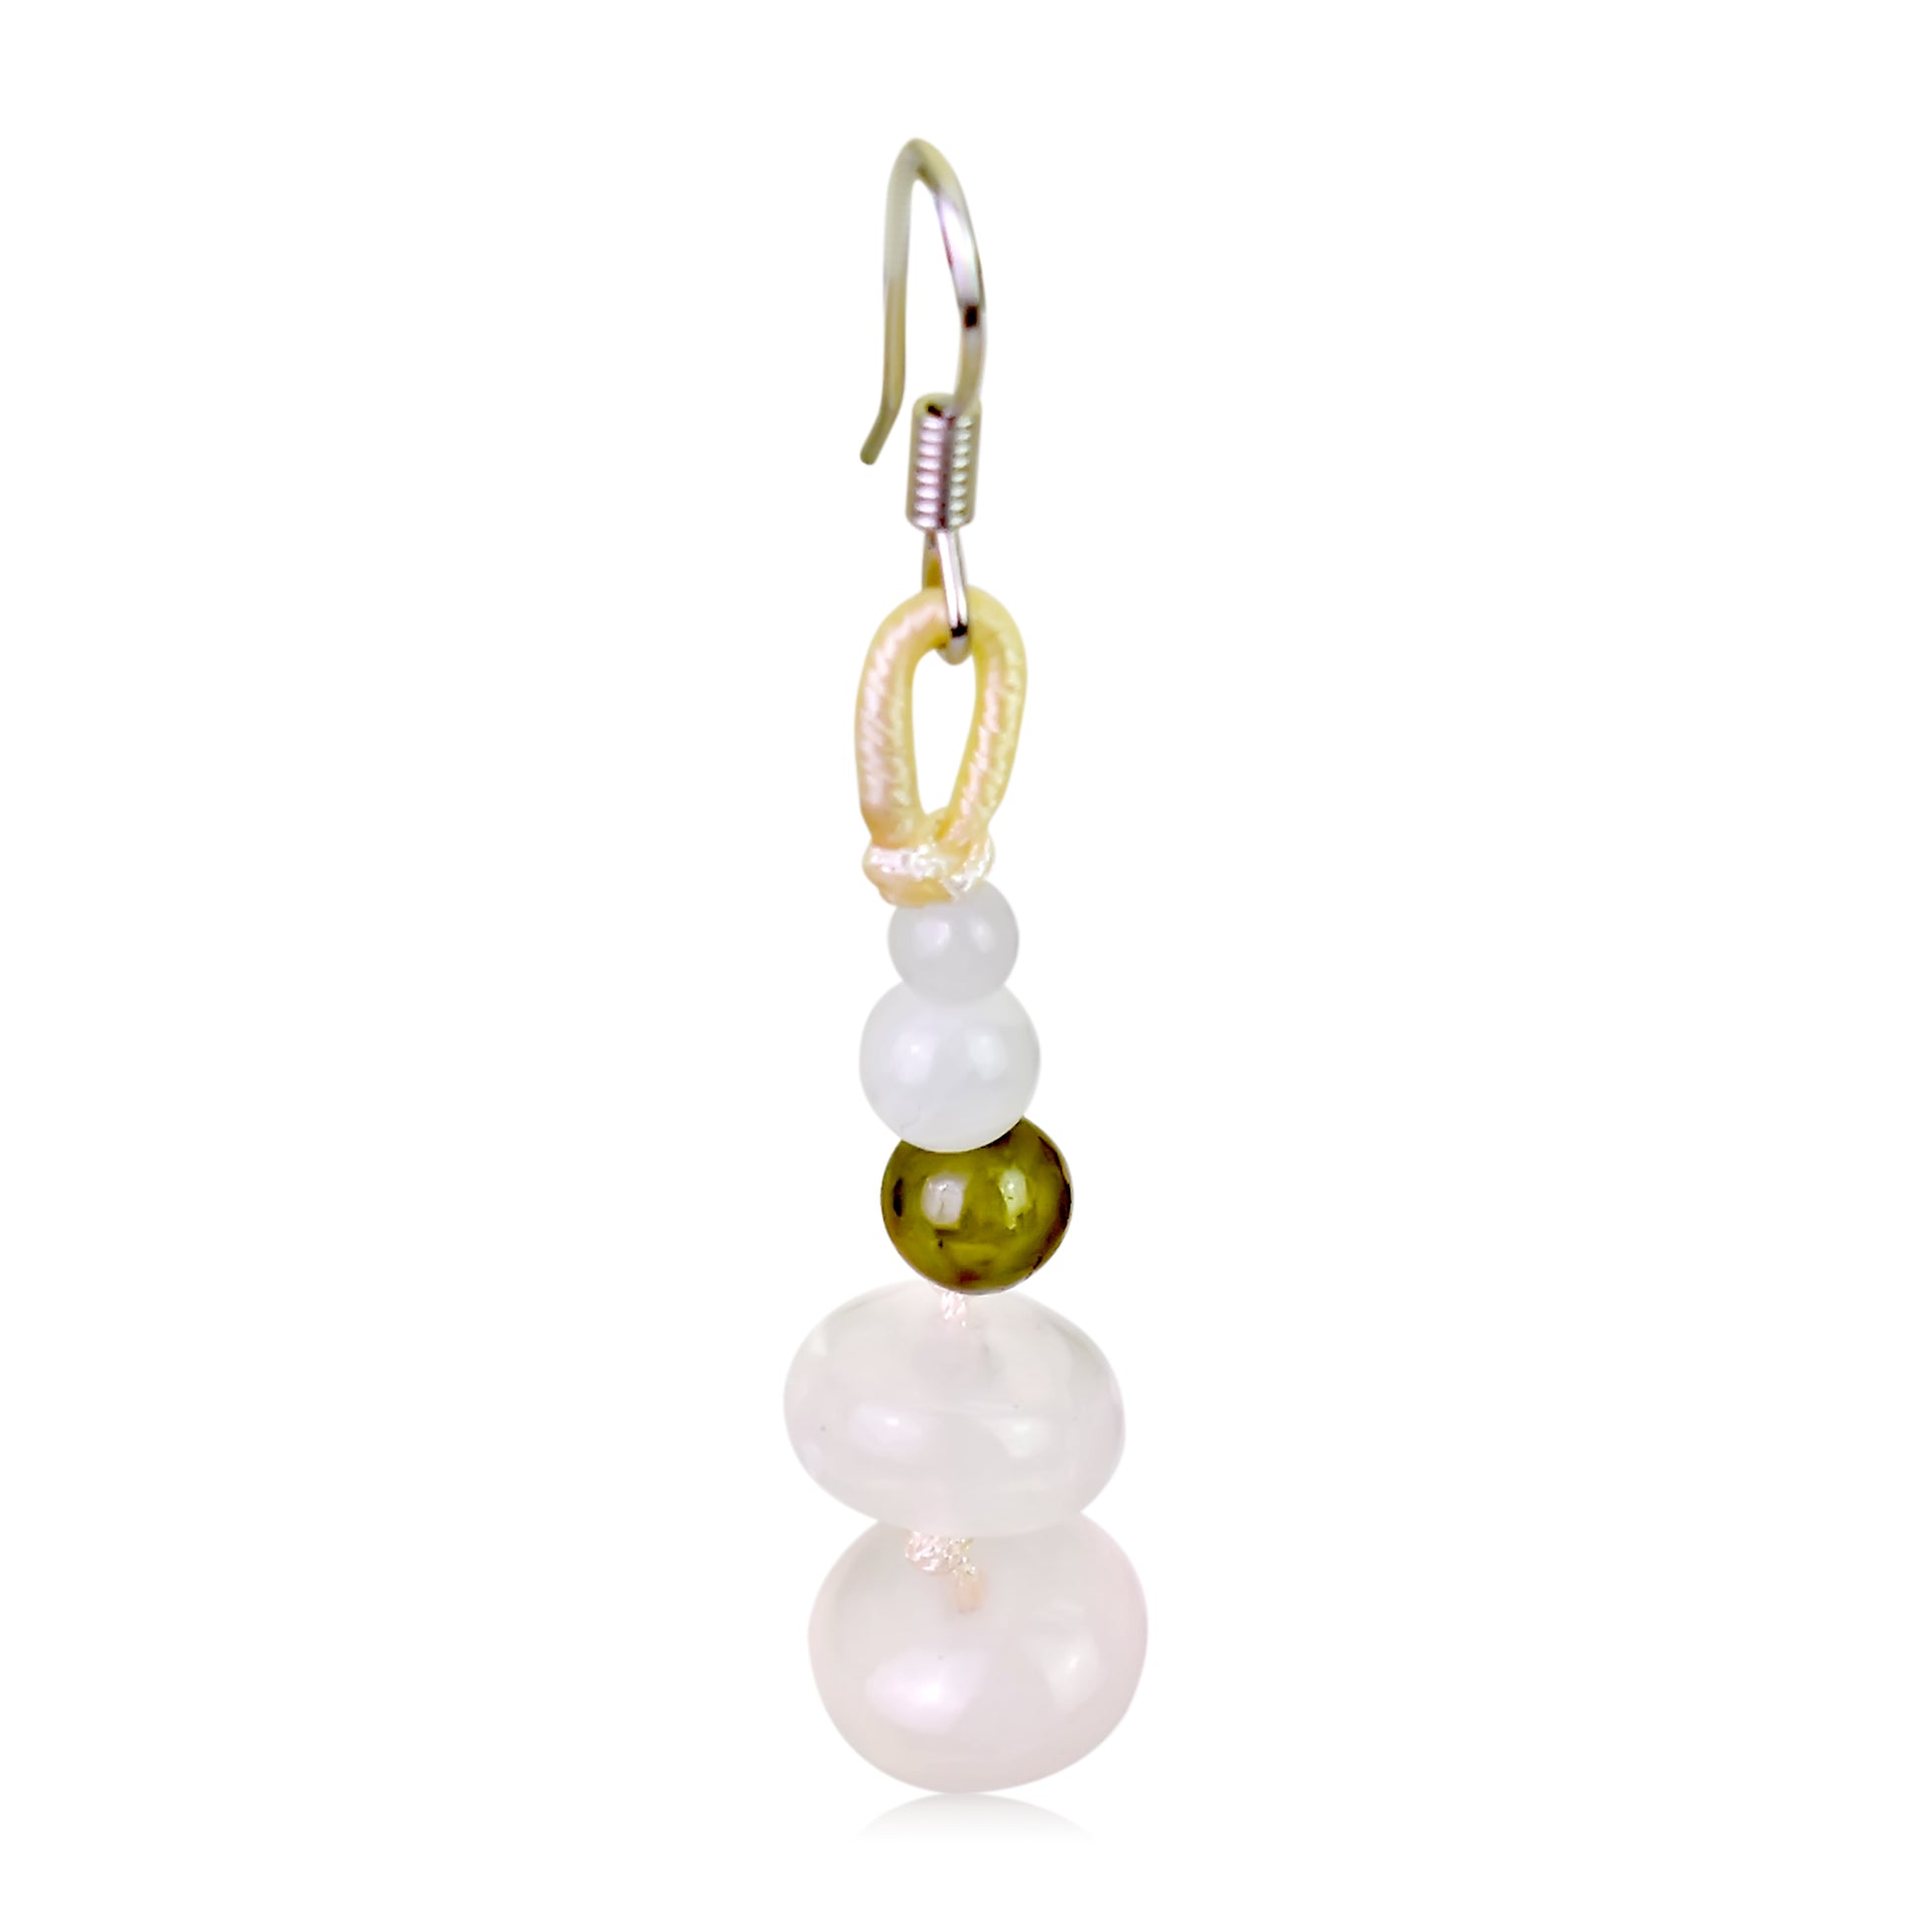 Look Absolutely Stunning with Glamorous Spherical Rose Quartz Earrings made with White Cord